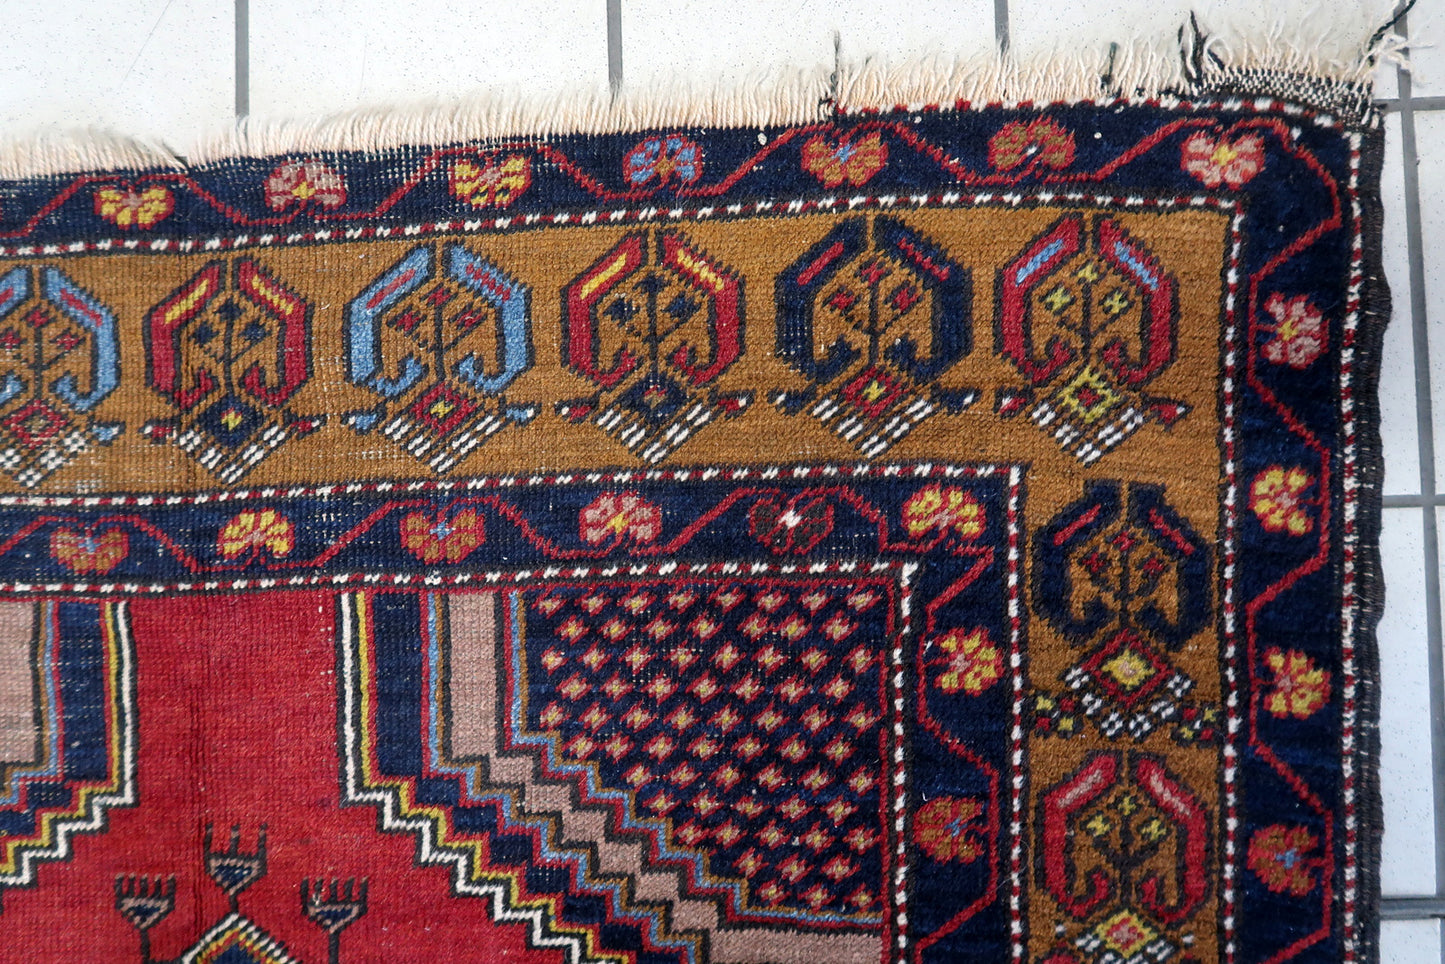 Overhead shot of the Turkish Anatolian rug displaying its detailed center geometric shapes